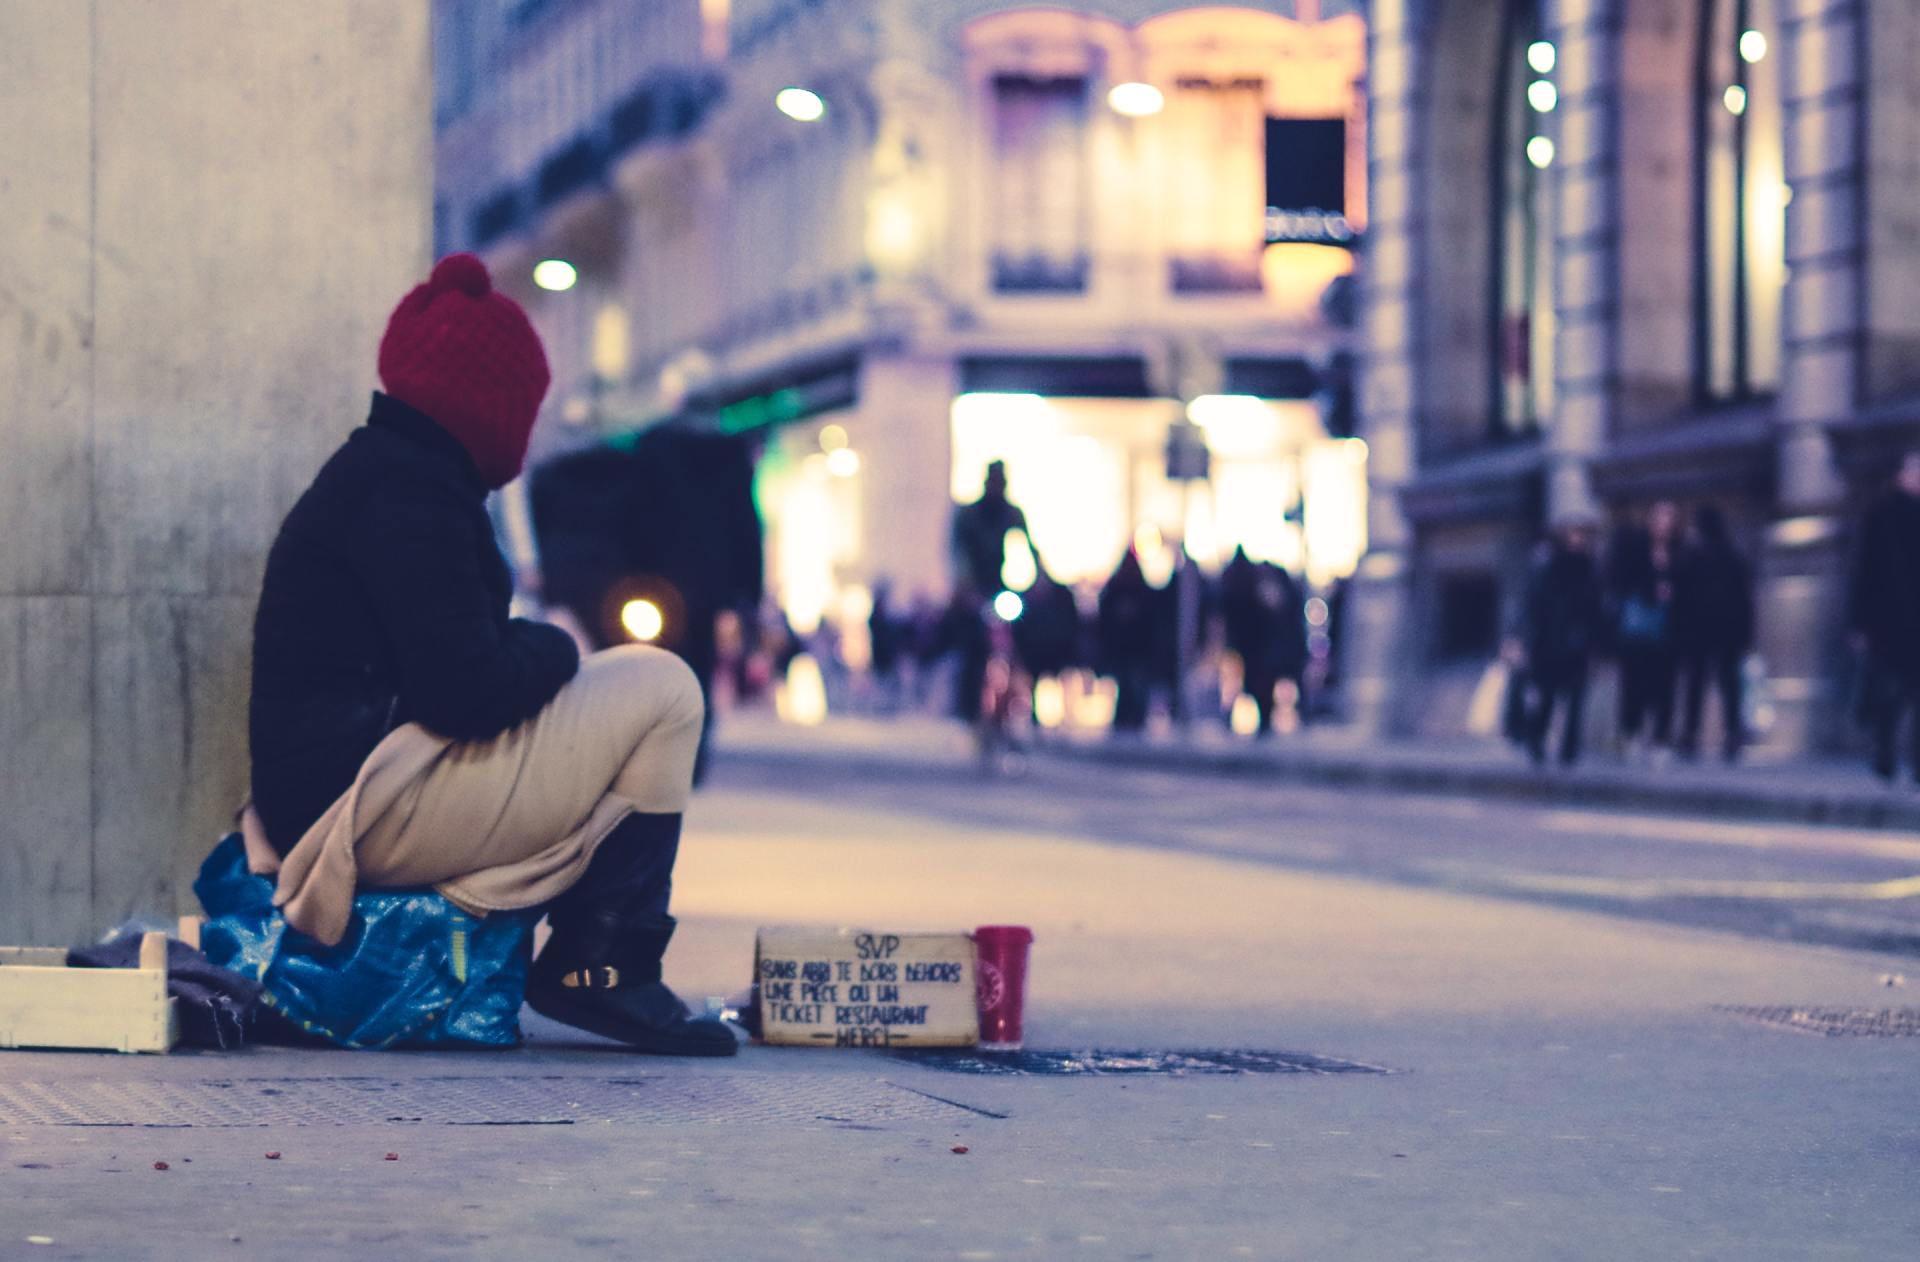 Help the Homeless is supported by the Randal Charitable Foundation